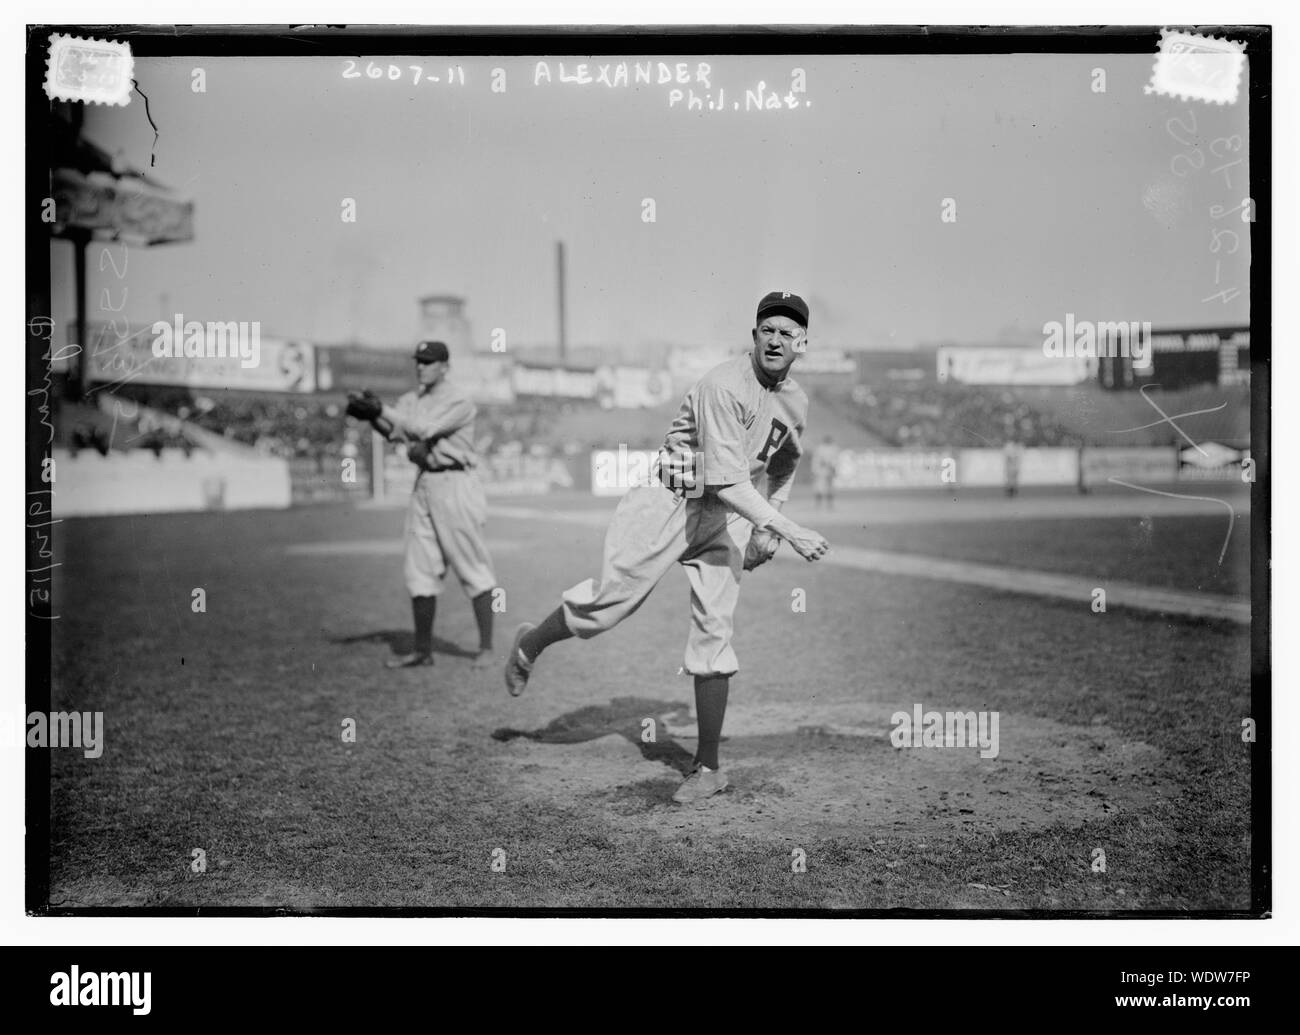 Grover Cleveland Alexander, Philadelphie, NL (baseball) Abstract/moyenne : 1 négative : 5 x 7 in. ou moins. Banque D'Images